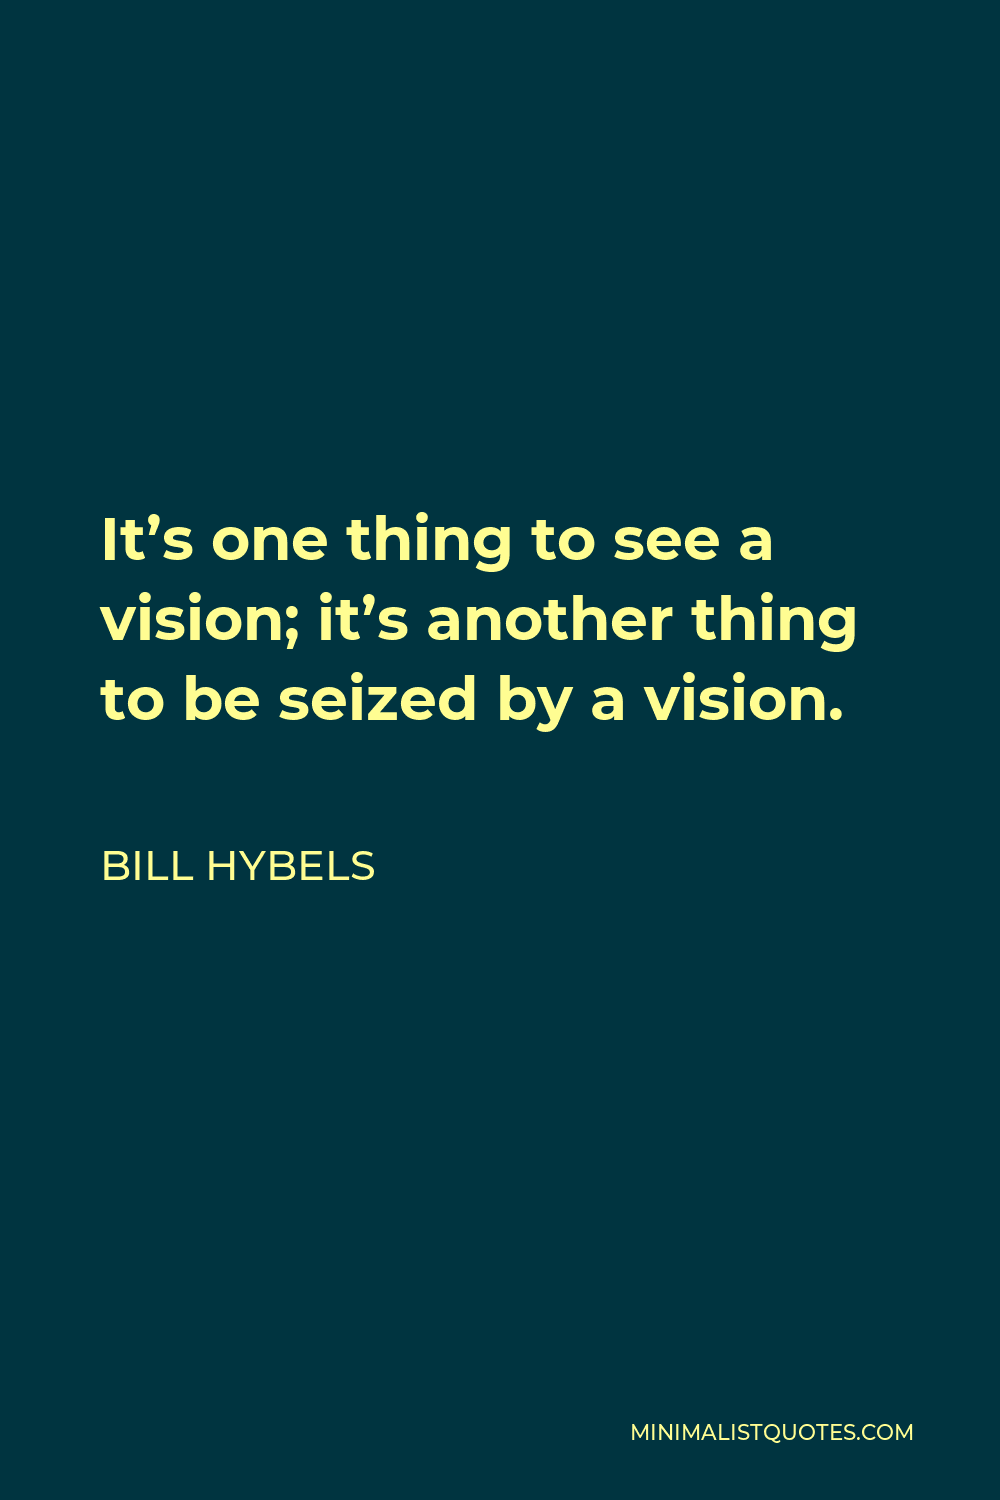 Bill Hybels Quote - It’s one thing to see a vision; it’s another thing to be seized by a vision.